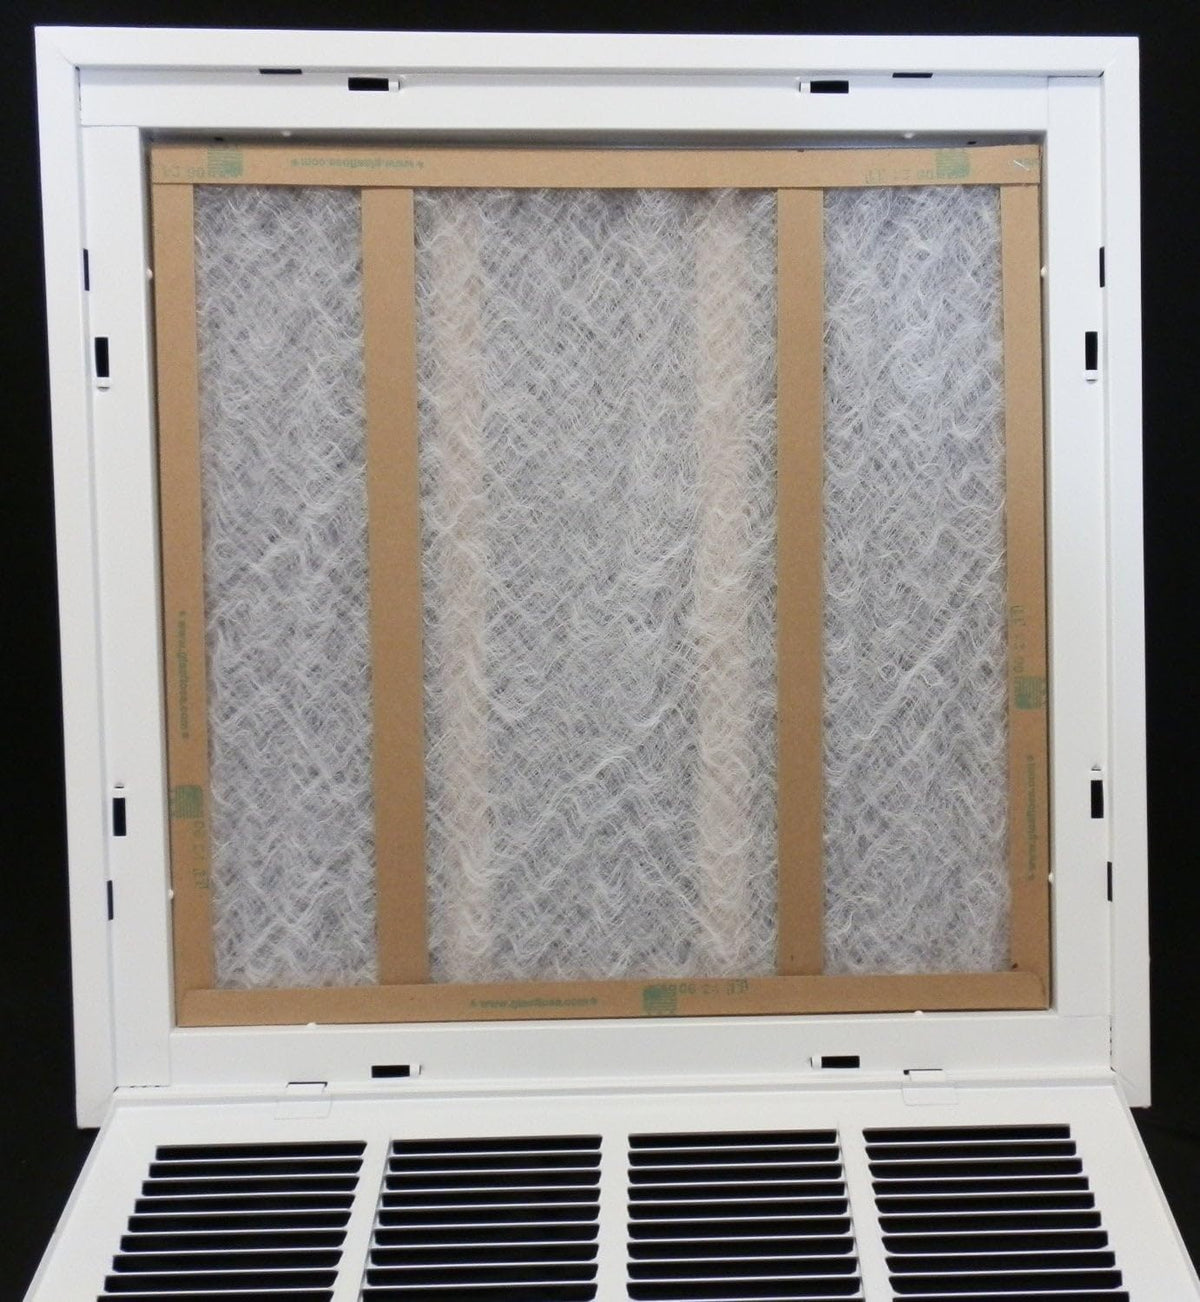 36&quot; X 16&quot; Steel Return Air Filter Grille for 1&quot; Filter - Fixed Hinged - [Outer Dimensions: 38 5/8&quot; X 18 5/8&quot;]